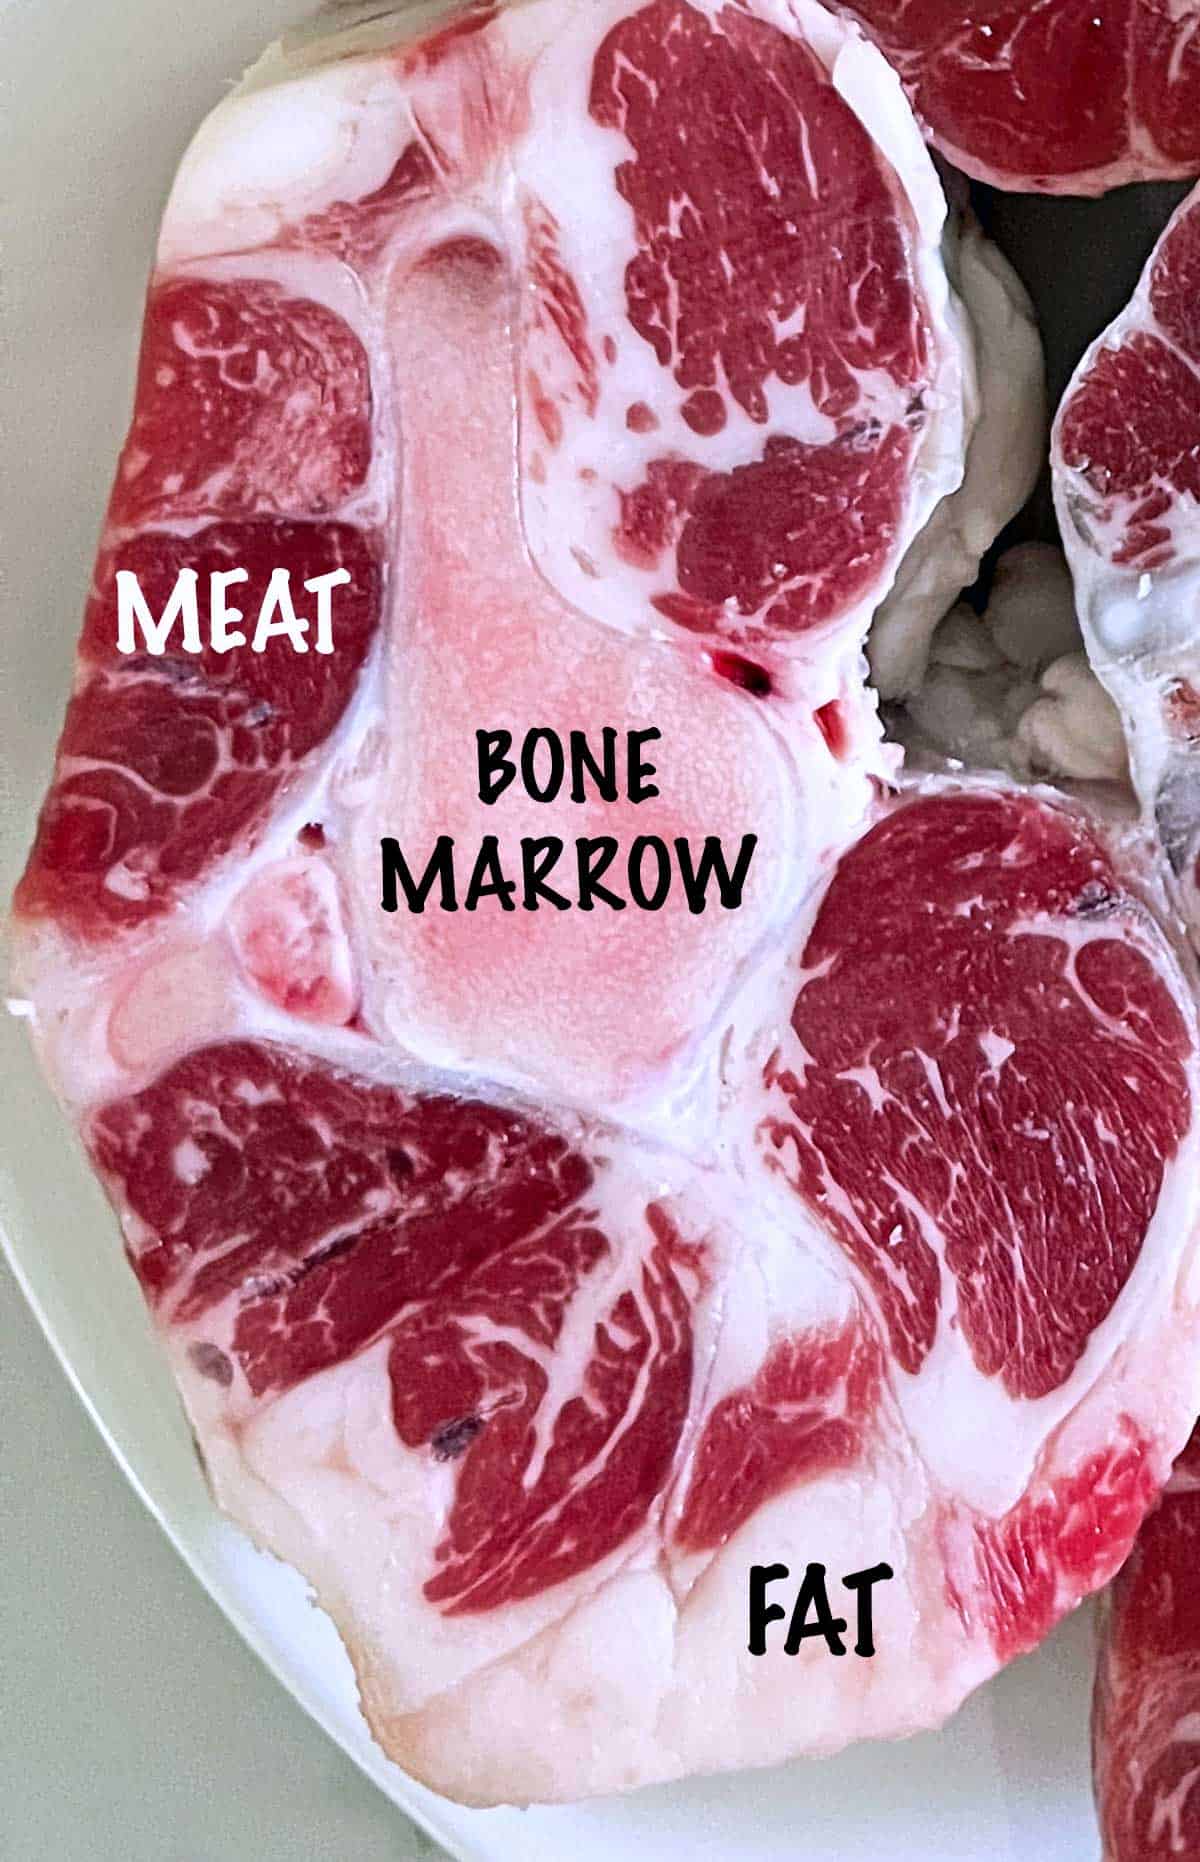 The parts of an oxtail: marrow, meat, and fat.